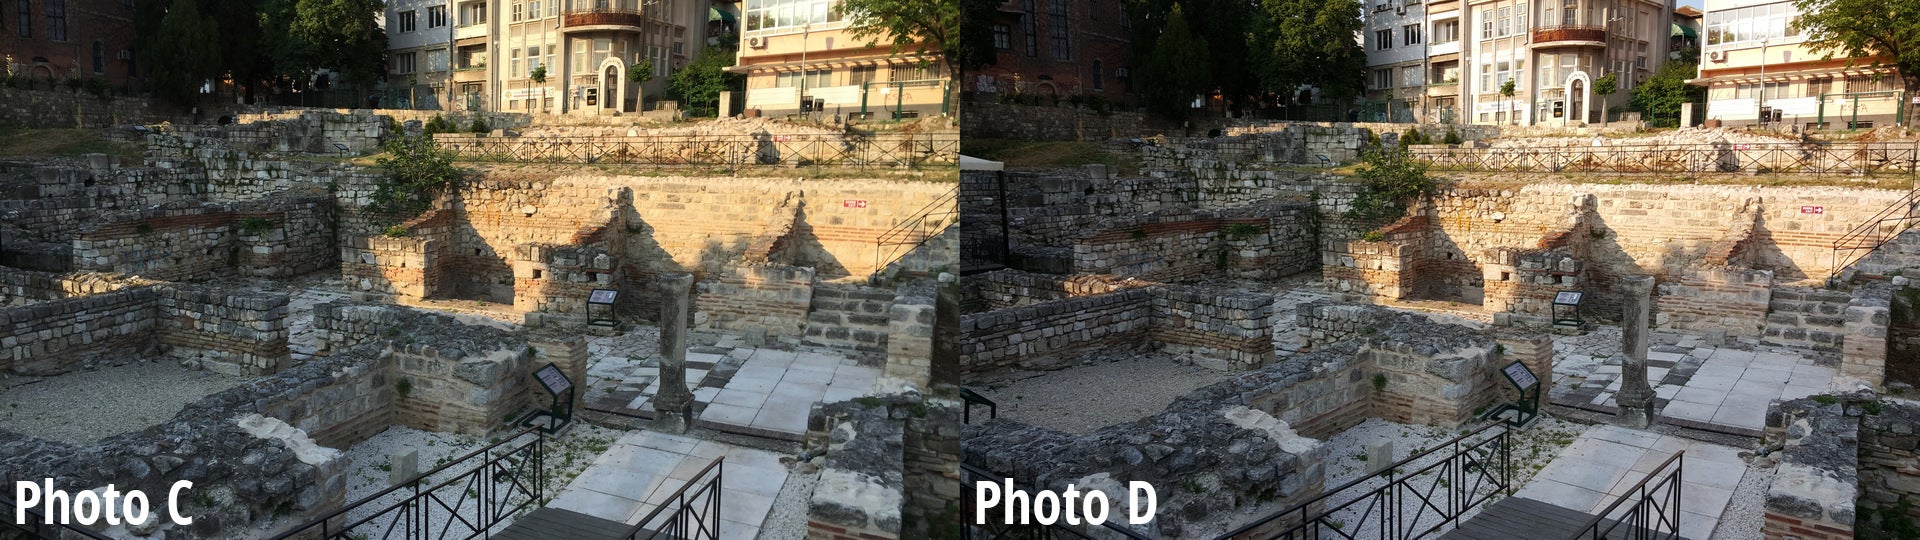 Side-by-side comparison - Samsung Galaxy S6 vs iPhone 6 blind camera comparison: vote for the better phone